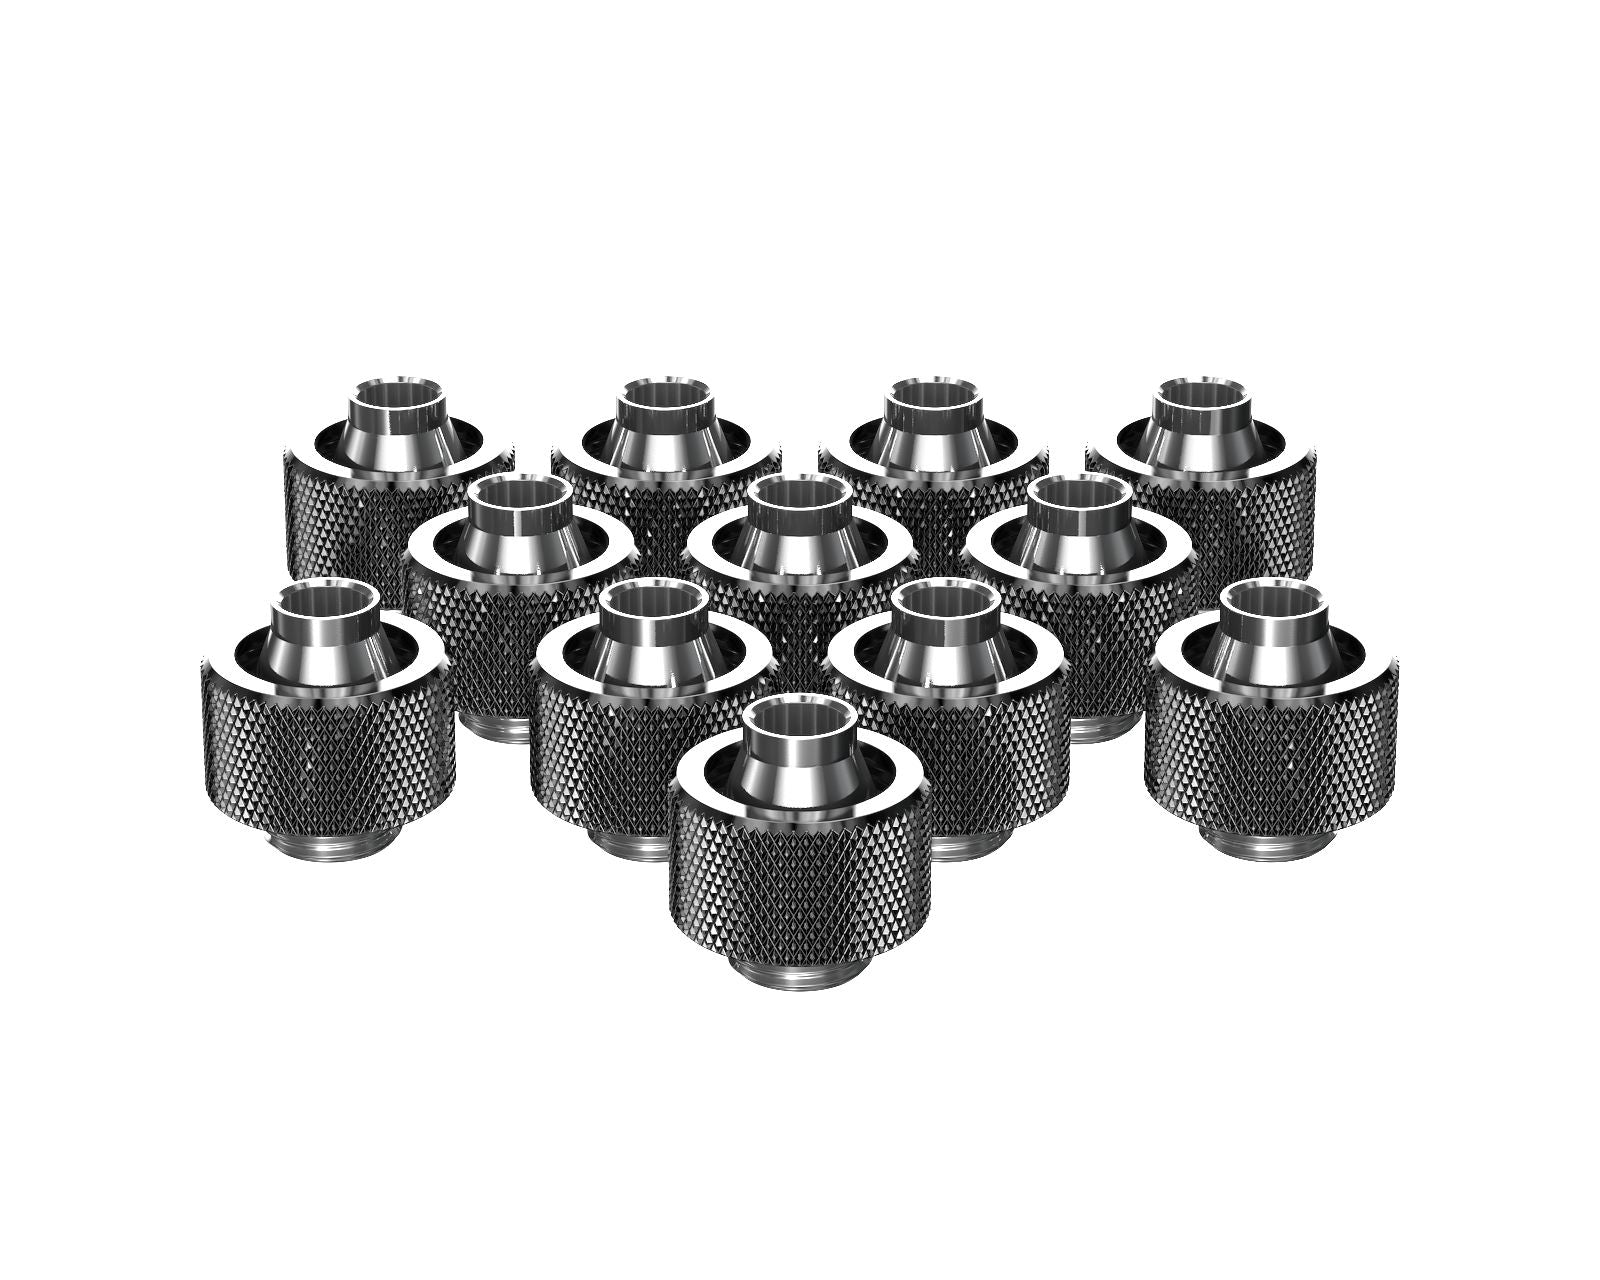 PrimoChill SecureFit SX - Premium Compression Fitting For 3/8in ID x 5/8in OD Flexible Tubing 12 Pack (F-SFSX58-12) - Available in 20+ Colors, Custom Watercooling Loop Ready - Dark Nickel